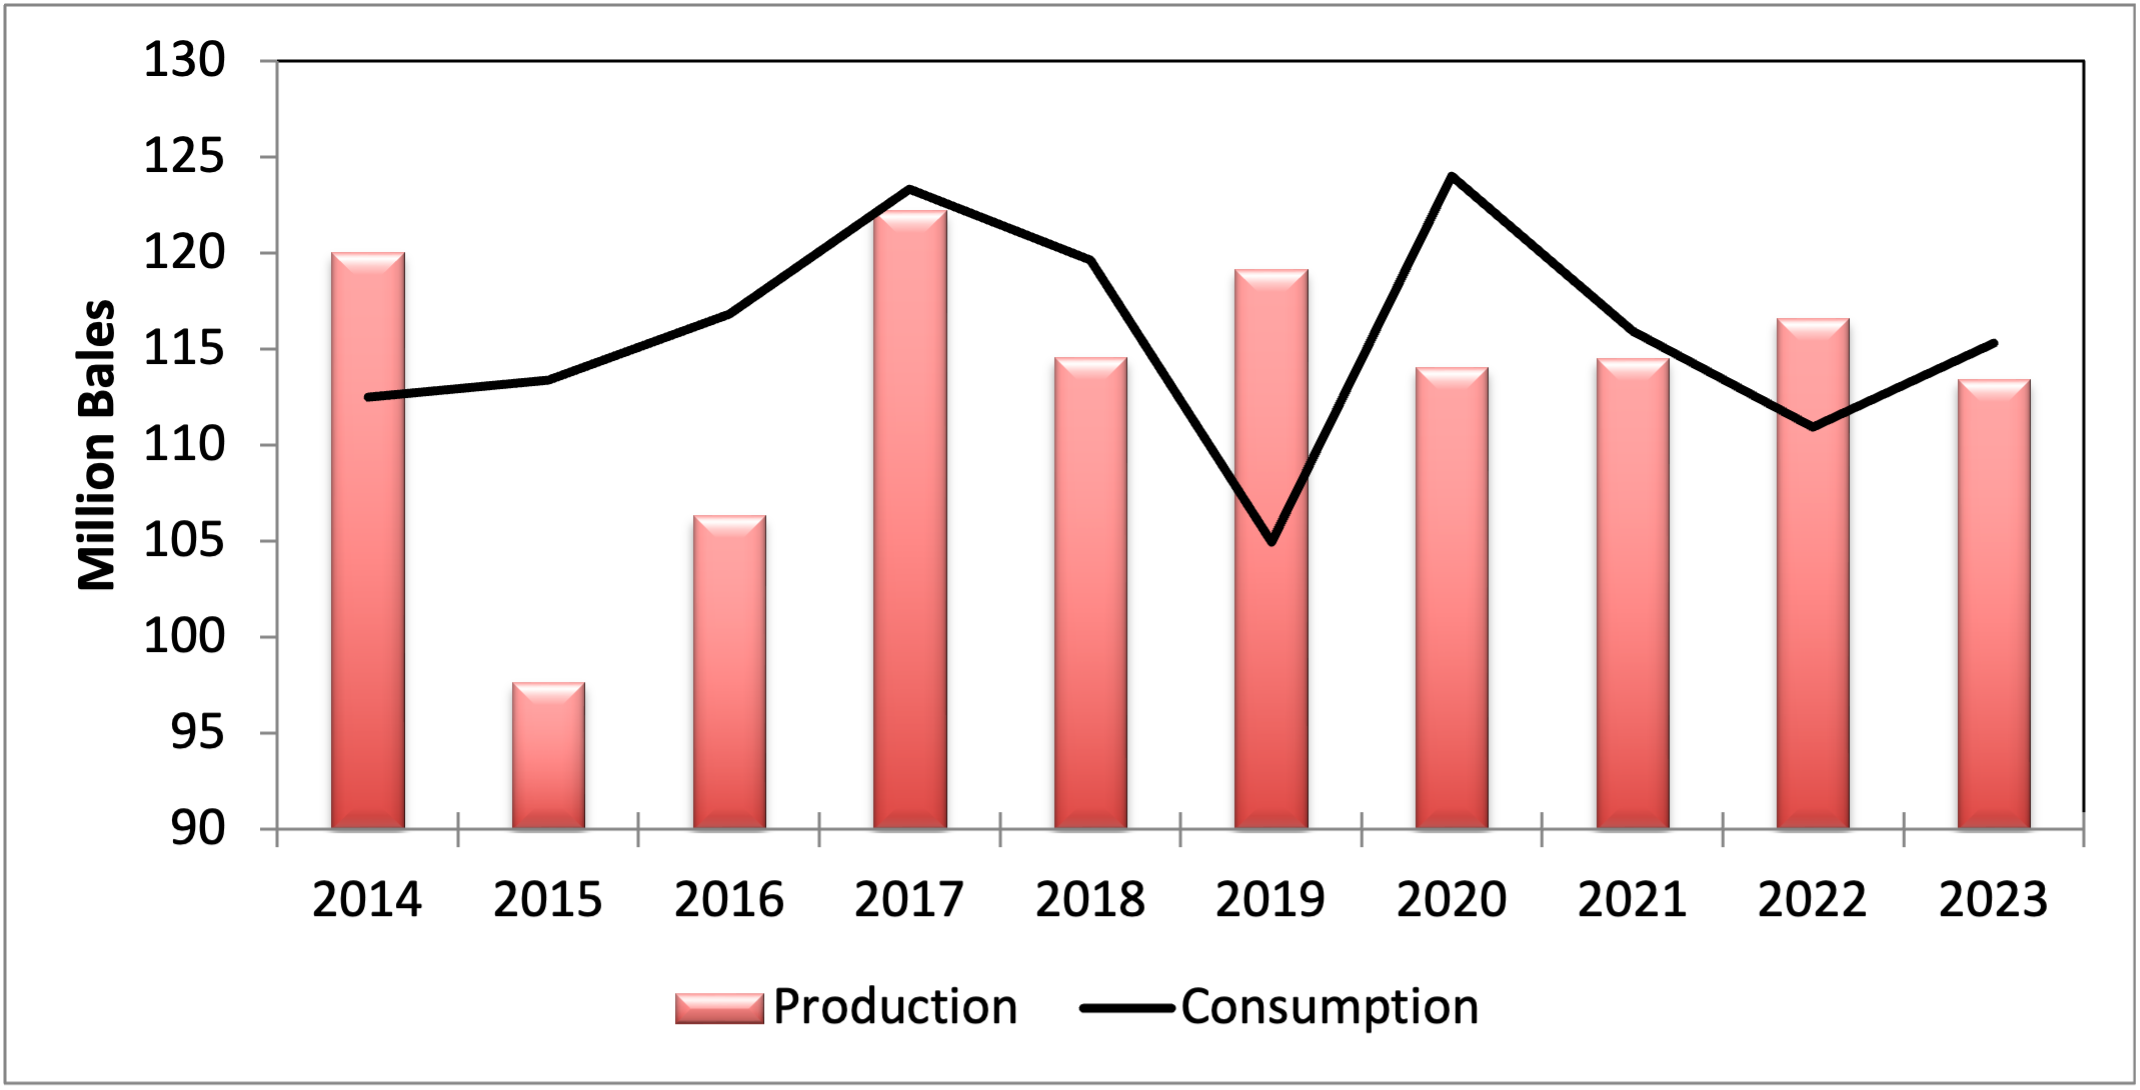 The world cotton supply and demand have fluctuated quite a bit between 2014–2023, with 2023 production at about 113 million bales and consumption at about 115 million bales.